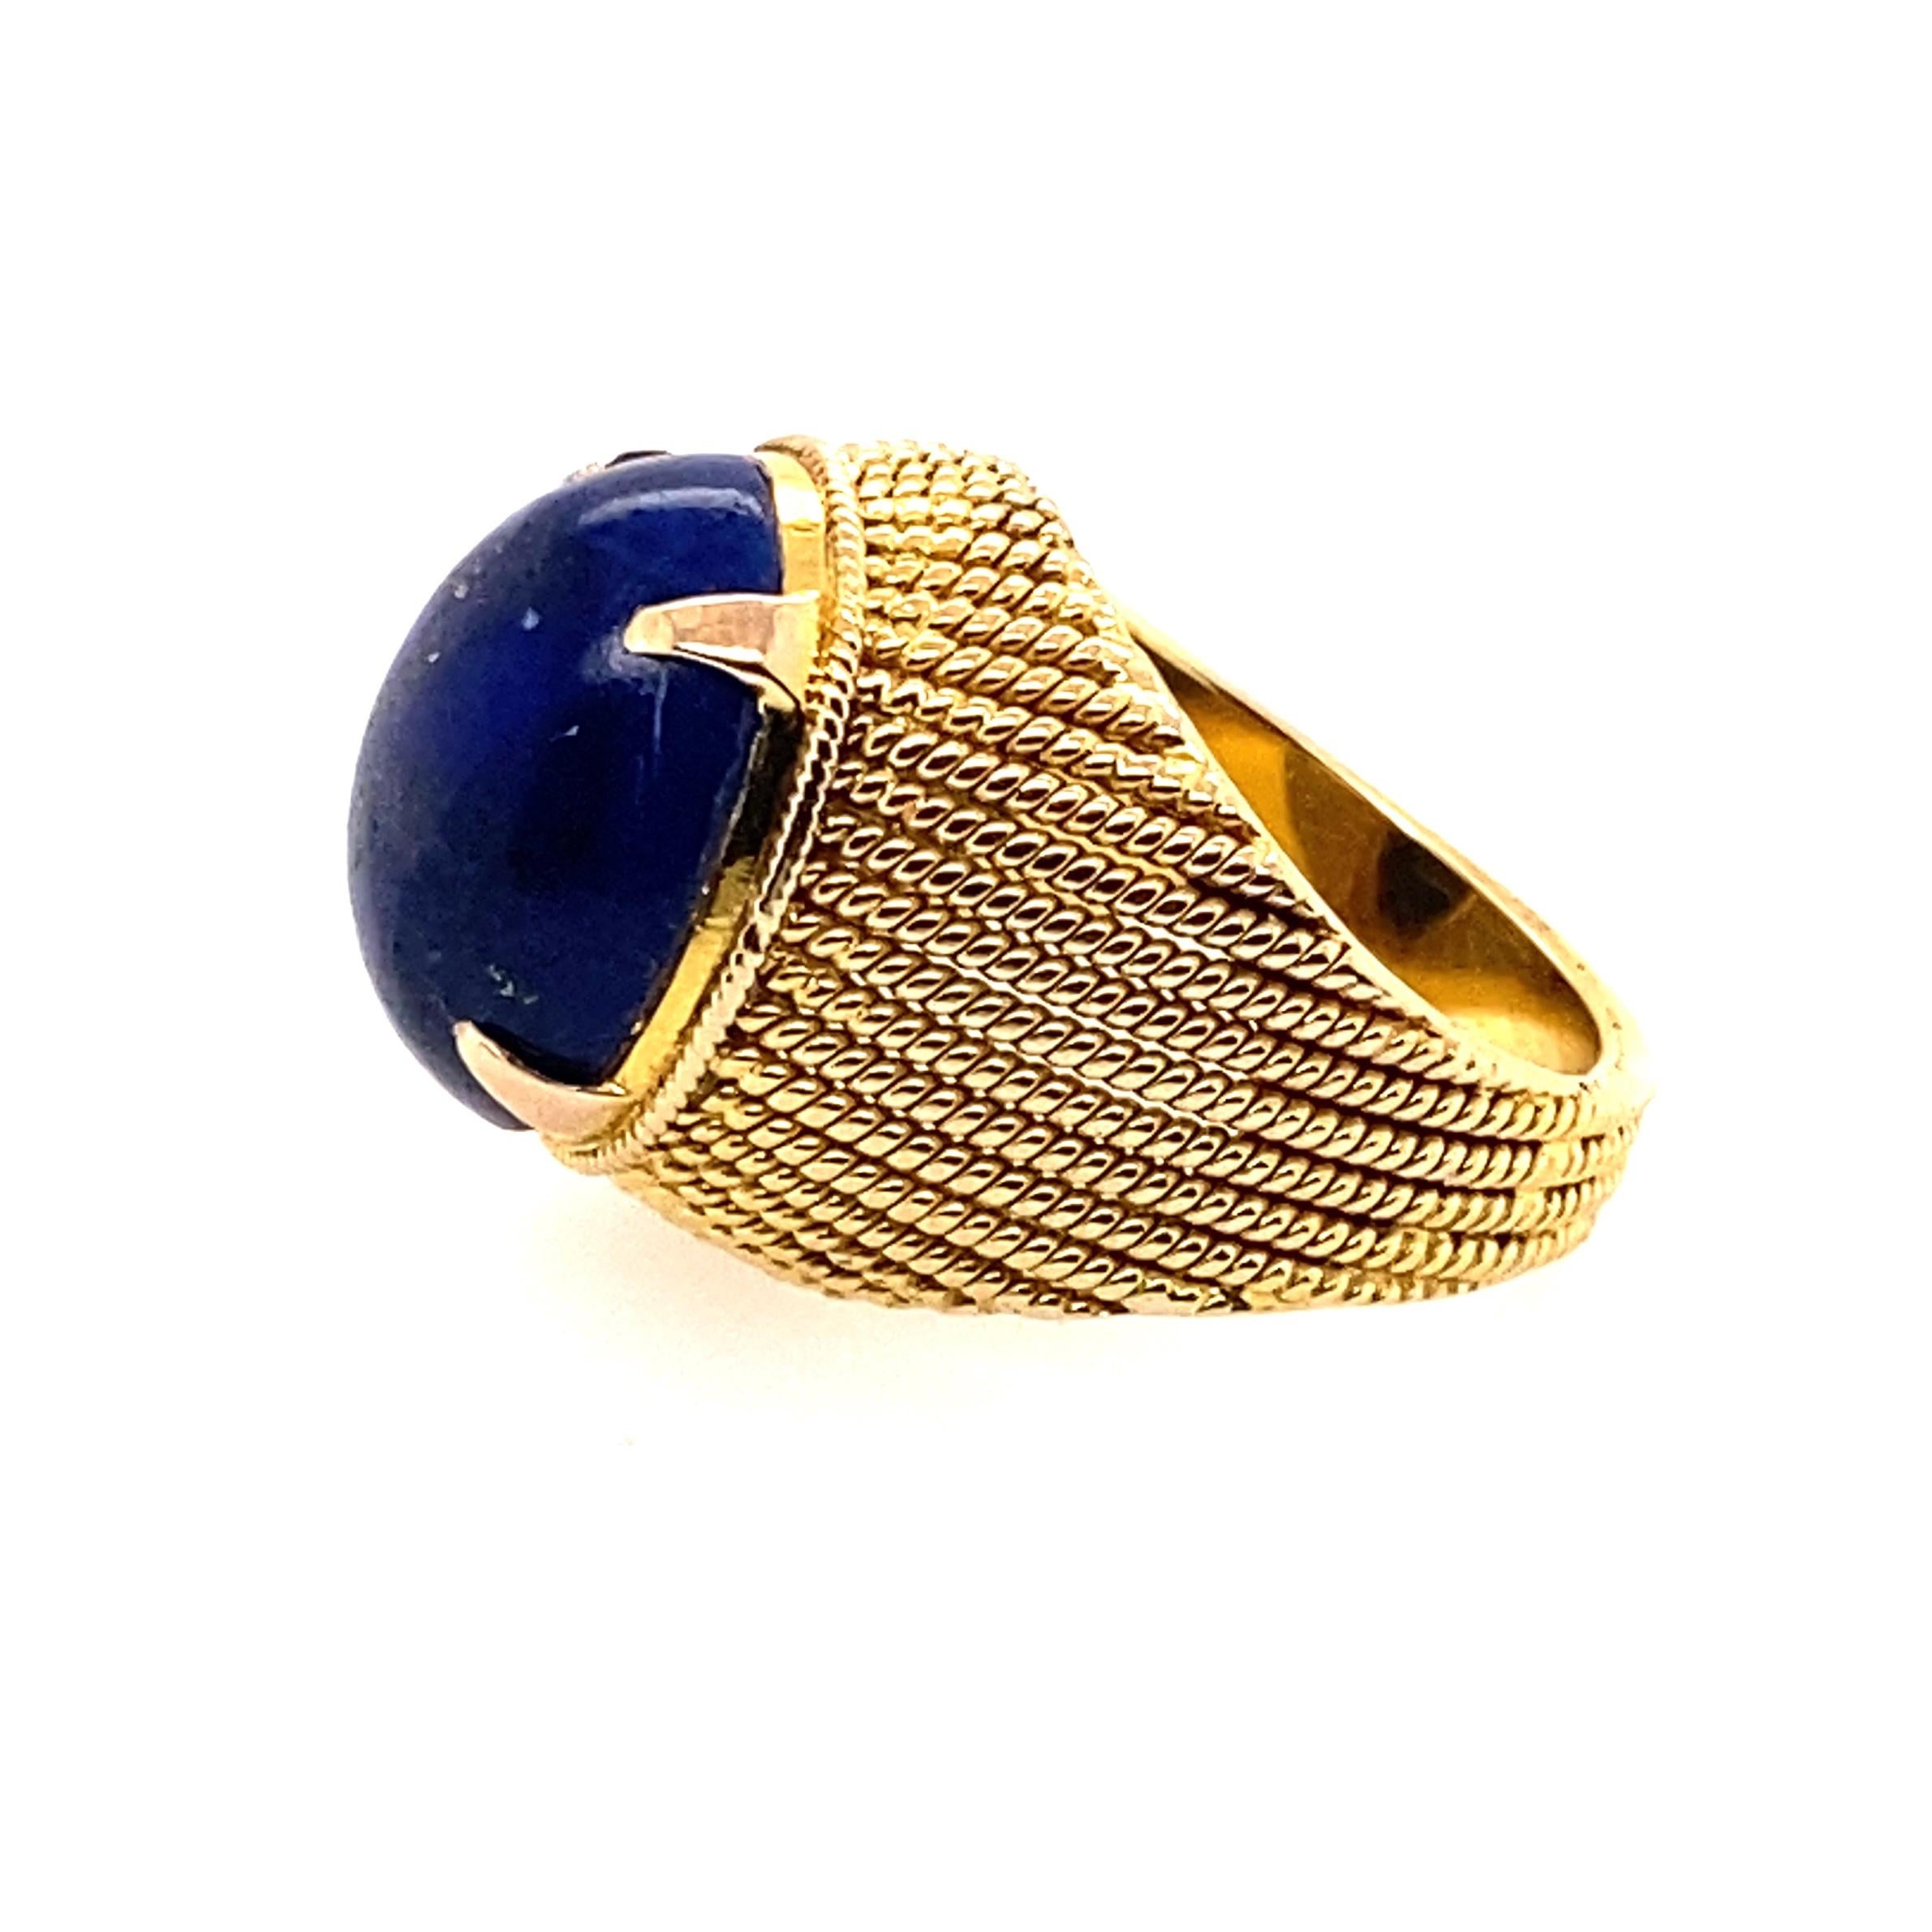 18 Karat Yellow Gold Lapis Lazuli Cocktail Ring

Handmade 18kt yellow gold twisted wire dome ring contain an oval high dome lapis lazuli set in a four claw setting. Lapis lazuli sits 13mm in height above the finger. 

Lapis measurements; 16.18mm x